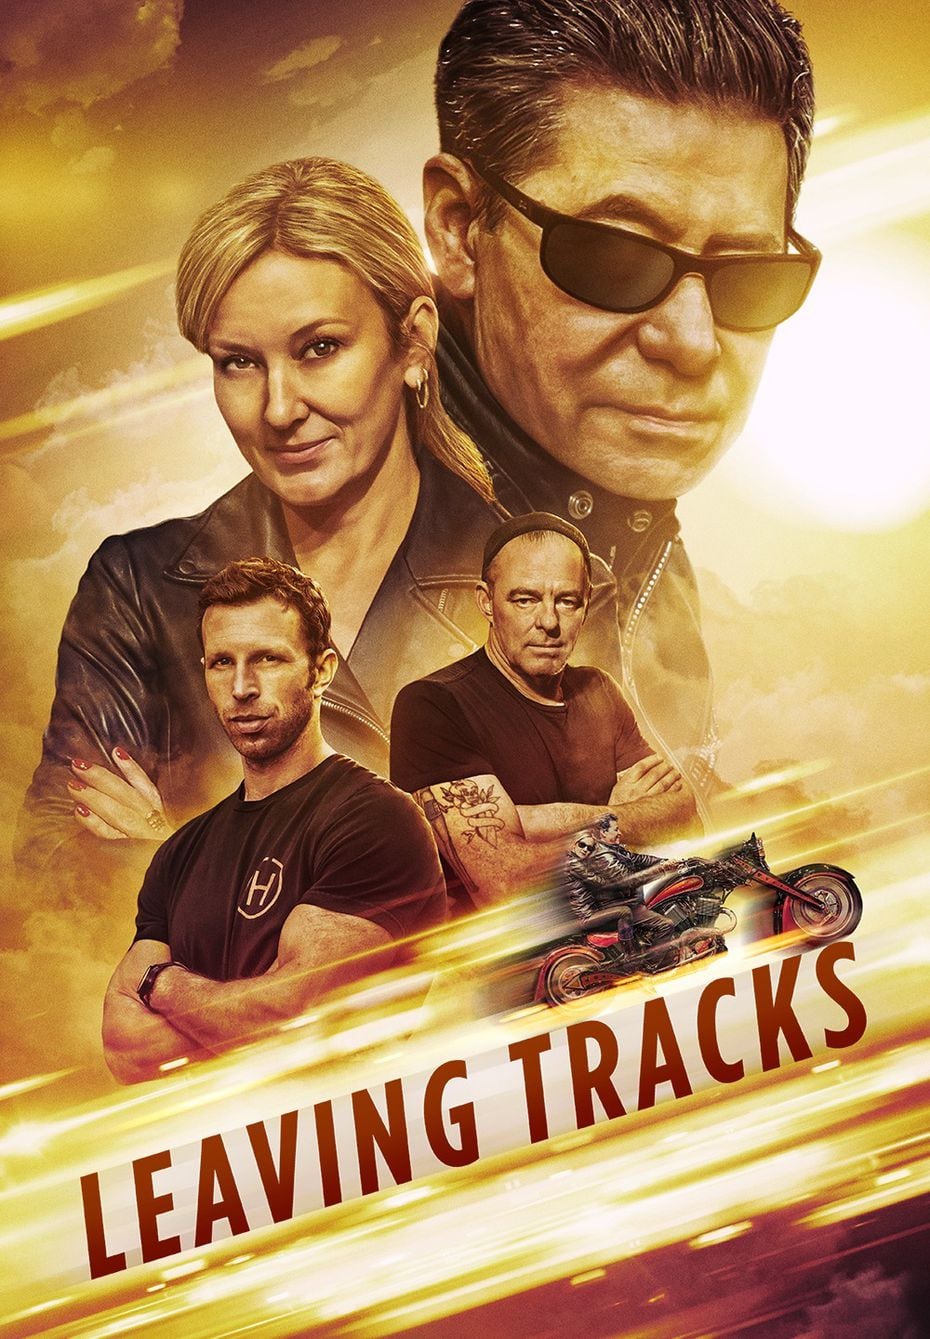 The Leaving Tracks movie poster features co-executive producers Stacey Mayfield and Bobby...